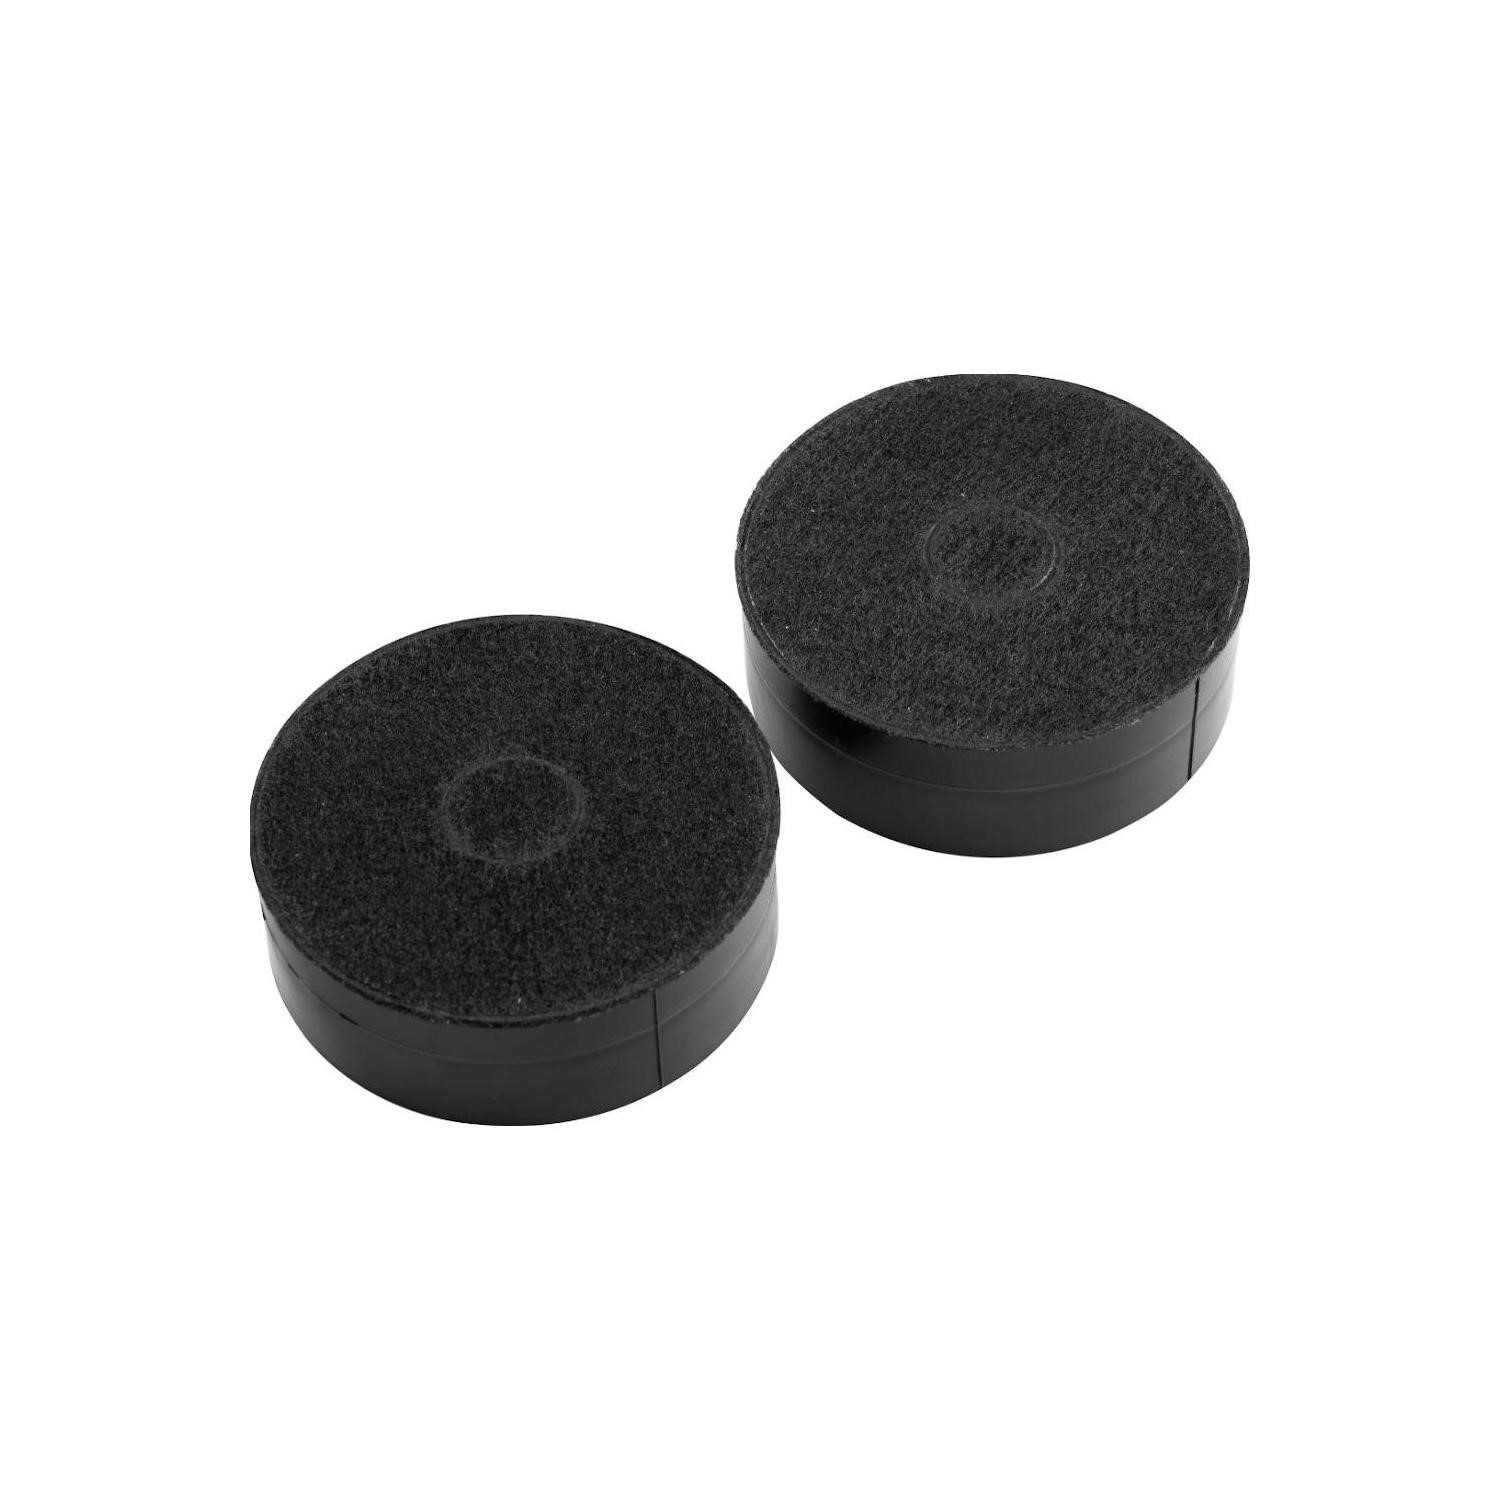 Electrolux ECFB03 Pair of Charcoal Filters for DPB3631S